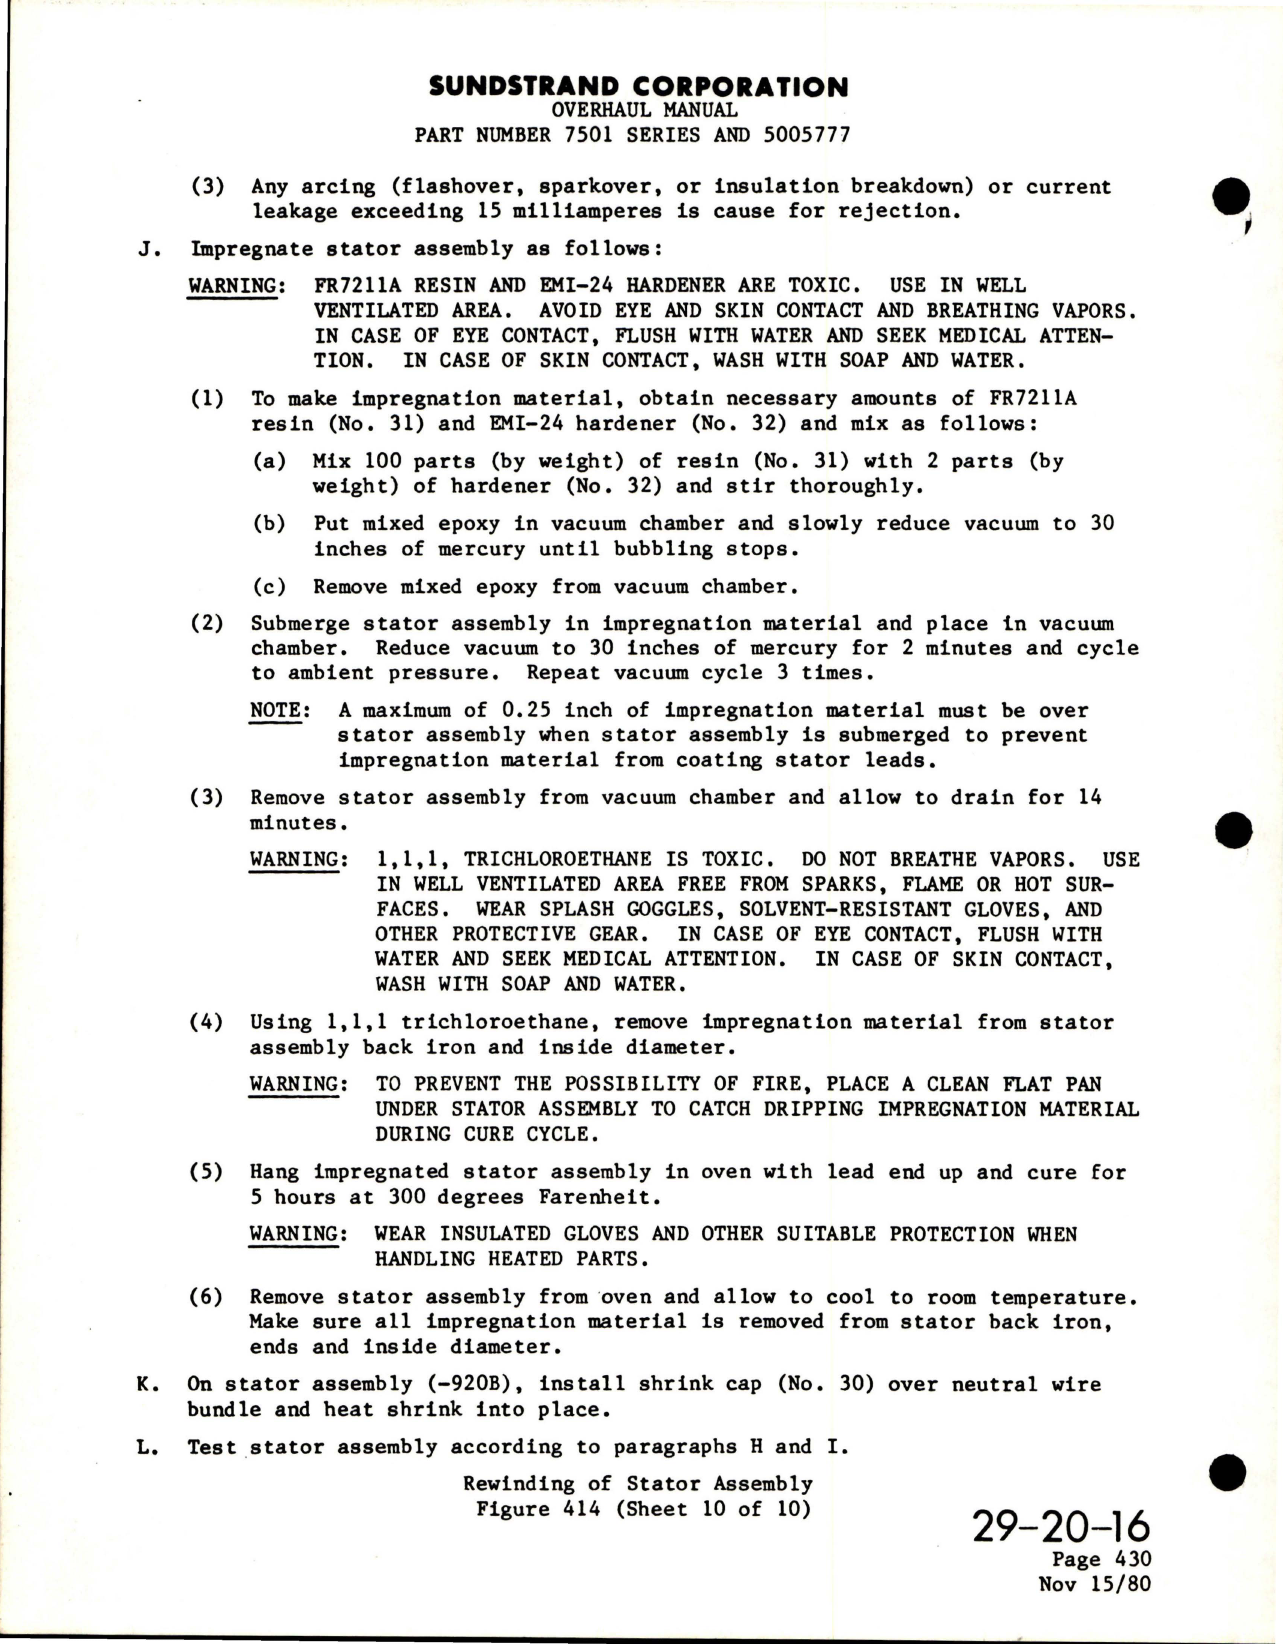 Sample page 8 from AirCorps Library document: Overhaul Manual with Parts for Liquid Cooled Motor Pump 